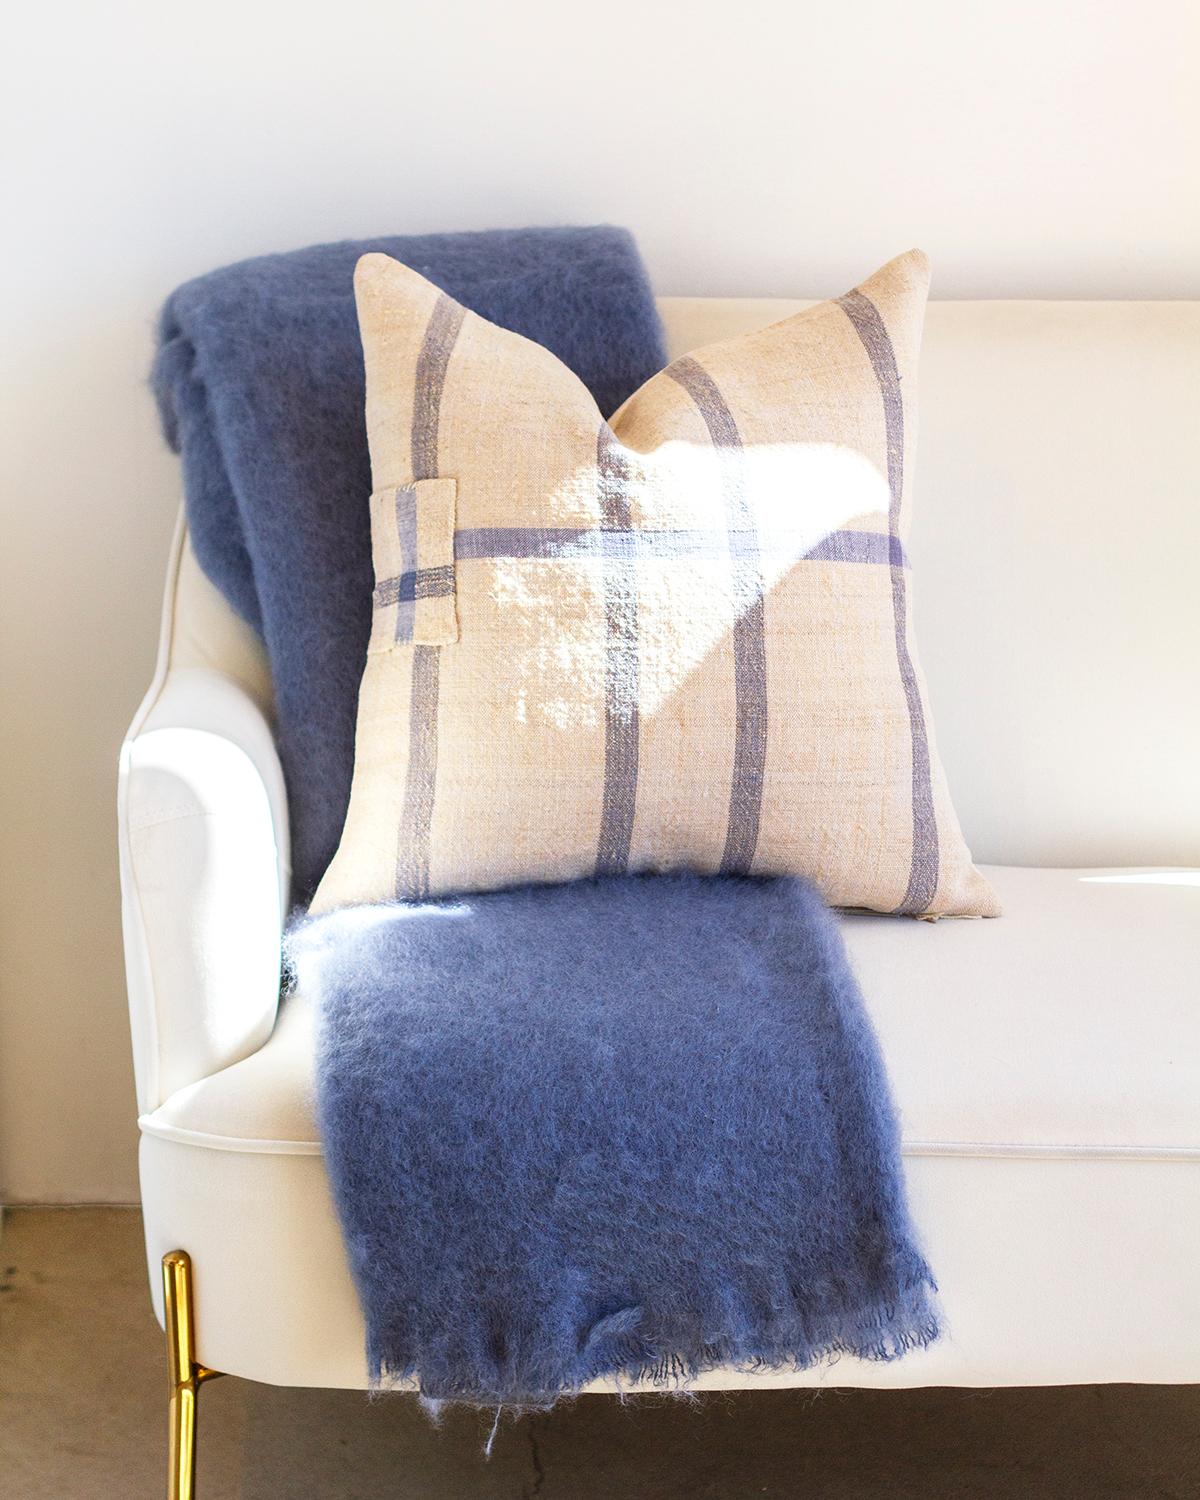 This luxurious Dusty Blue Mohair Blanket Throw is made of premium mohair for maximum coziness and warmth. Its soft, fuzzy texture adds a luxurious touch to any home decor. Perfect for the living room, couch, or bed, this throw can add a pop of color